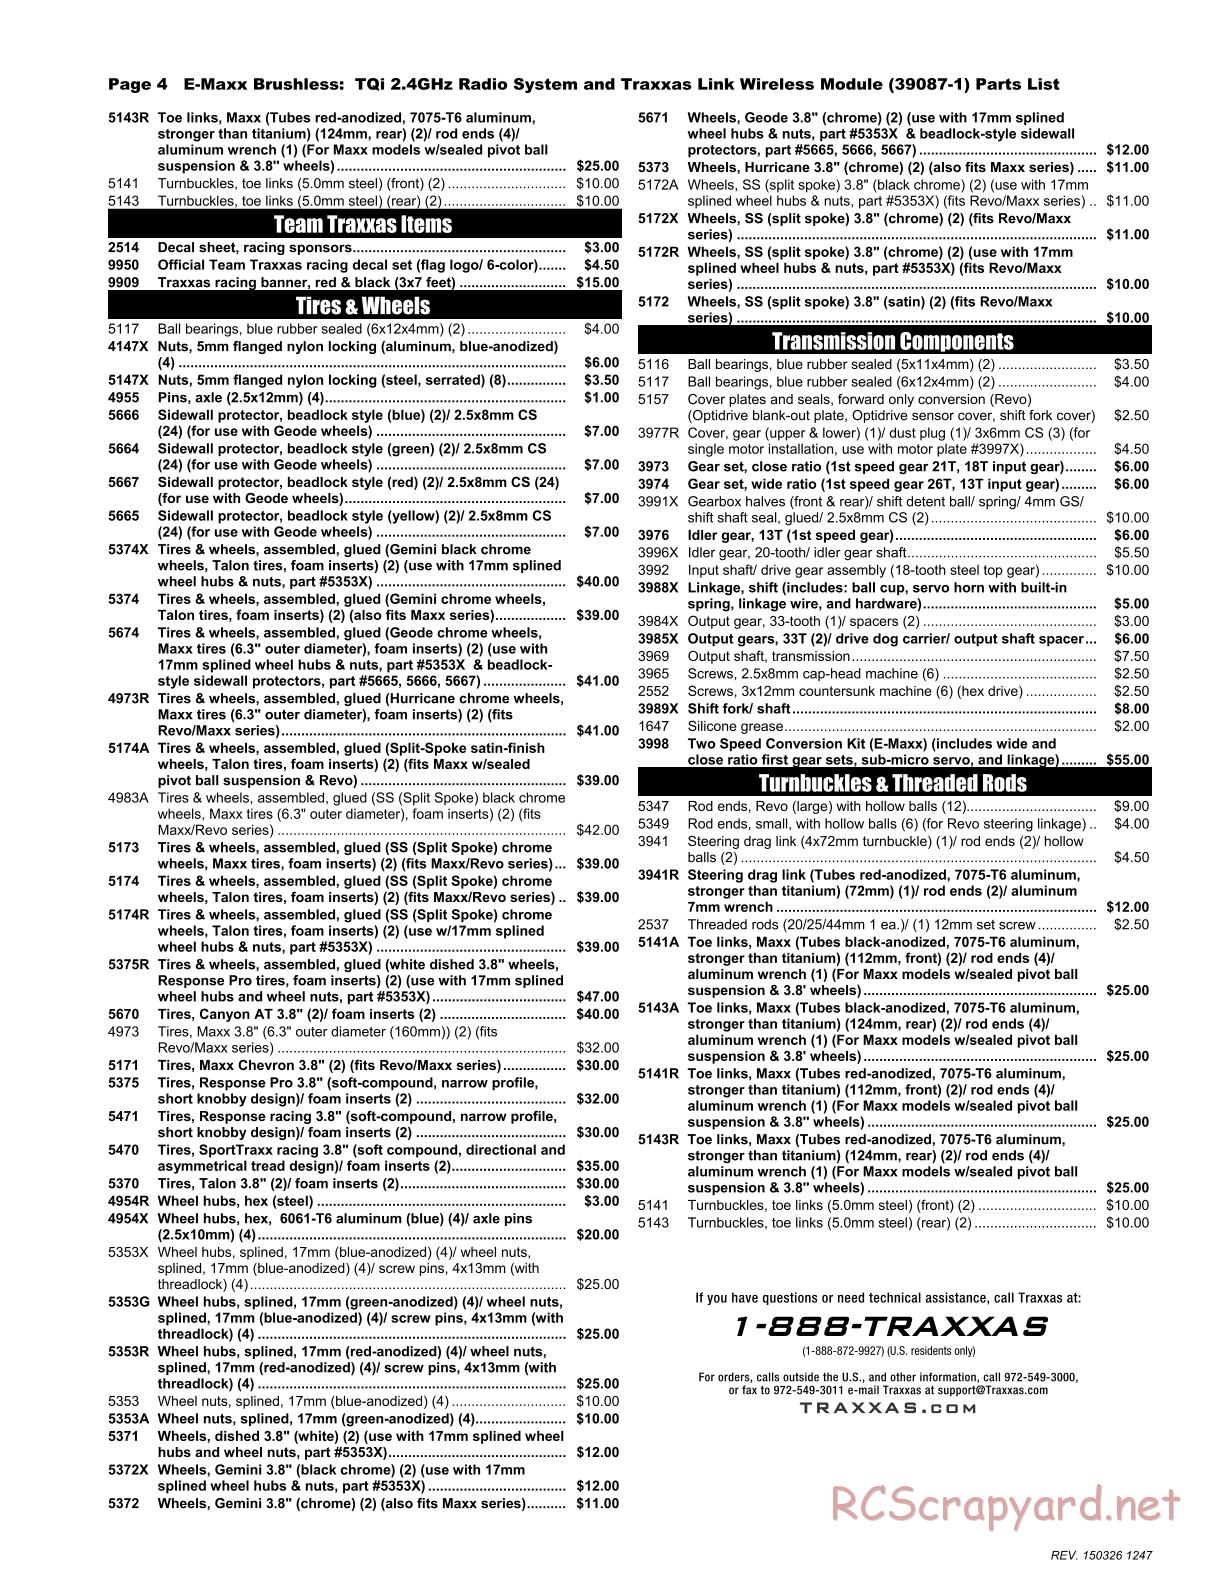 Traxxas - E-Maxx Brushless (2015) - Parts List - Page 4